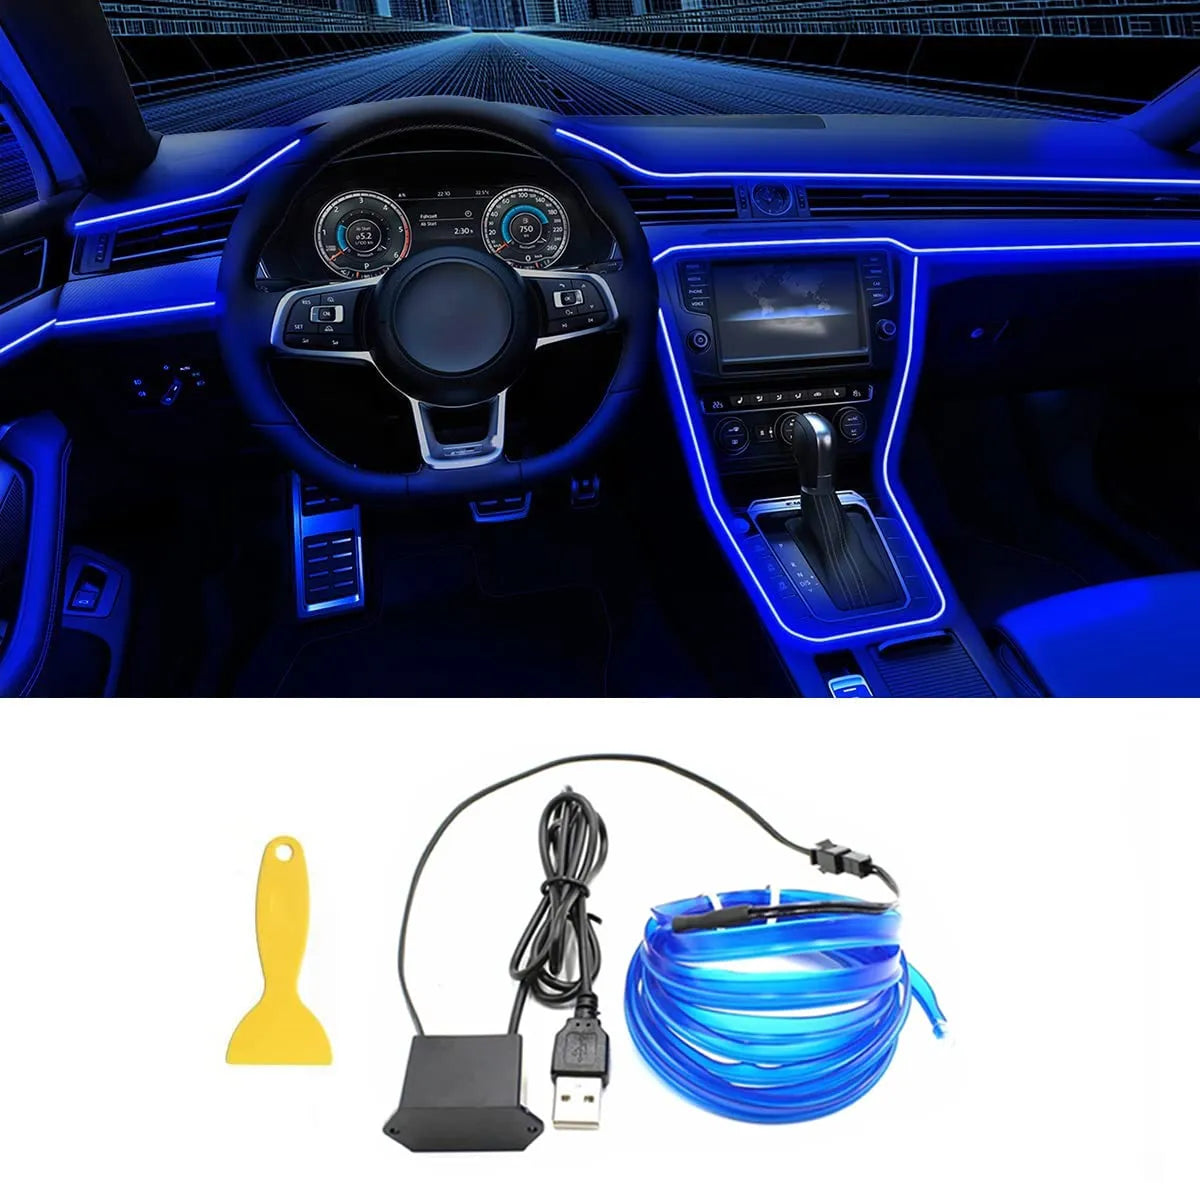 5M Car Interior Led Strip Light Wiring Decorative Lamp - Supersell